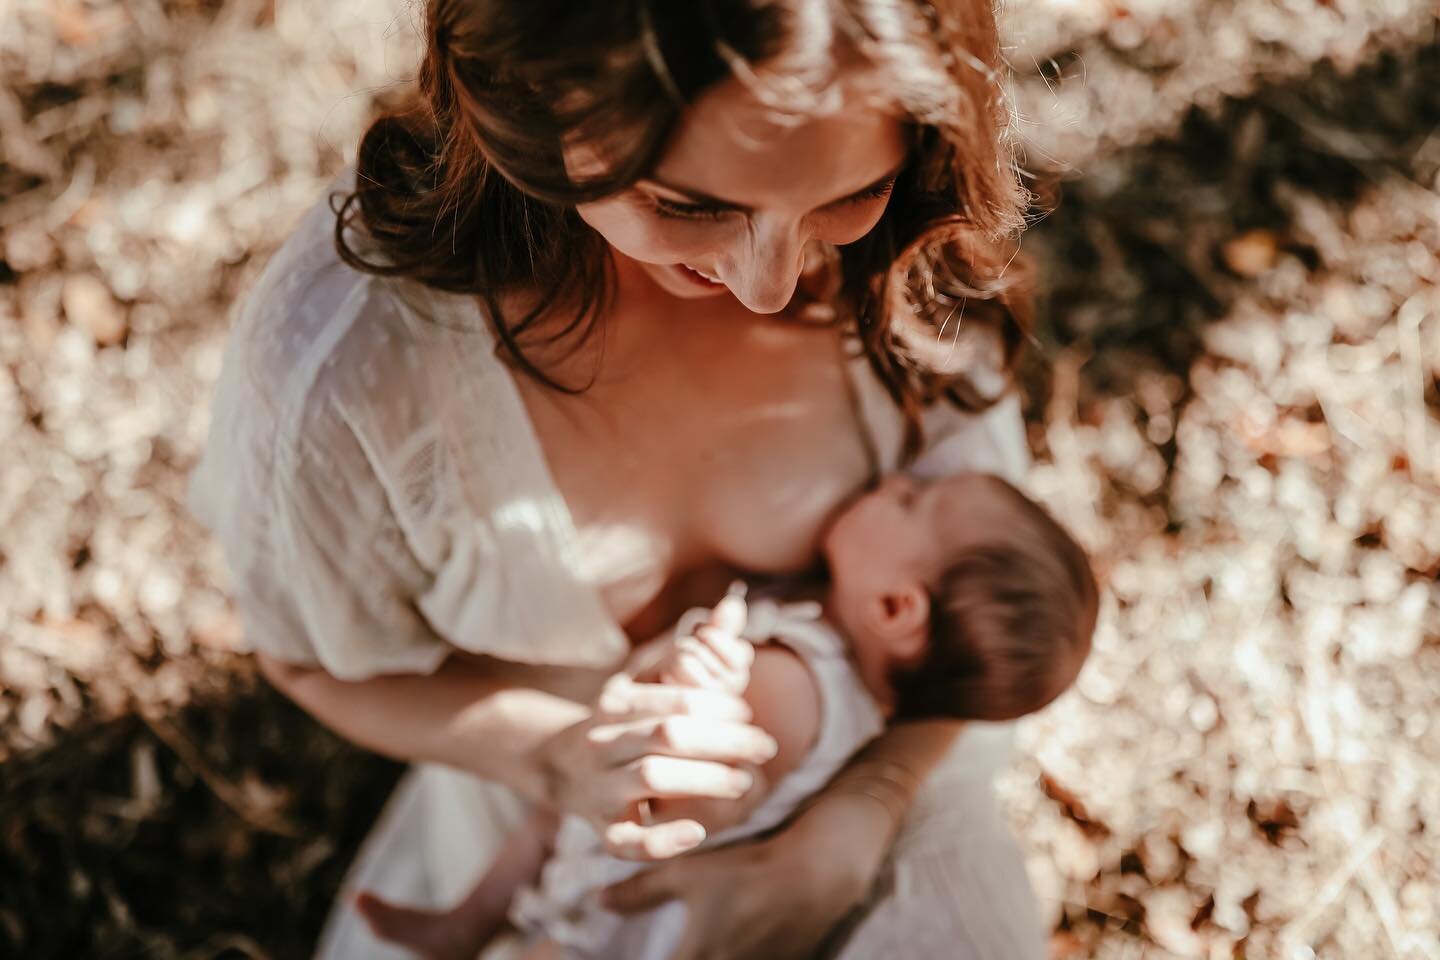 National Breastfeeding Week is among us! So, naturally I had to share this beautiful mama who I had the amazing opportunity to photograph breastfeeding her brand new baby!

My own breastfeeding journey was not as I expected it would be, but I perseve